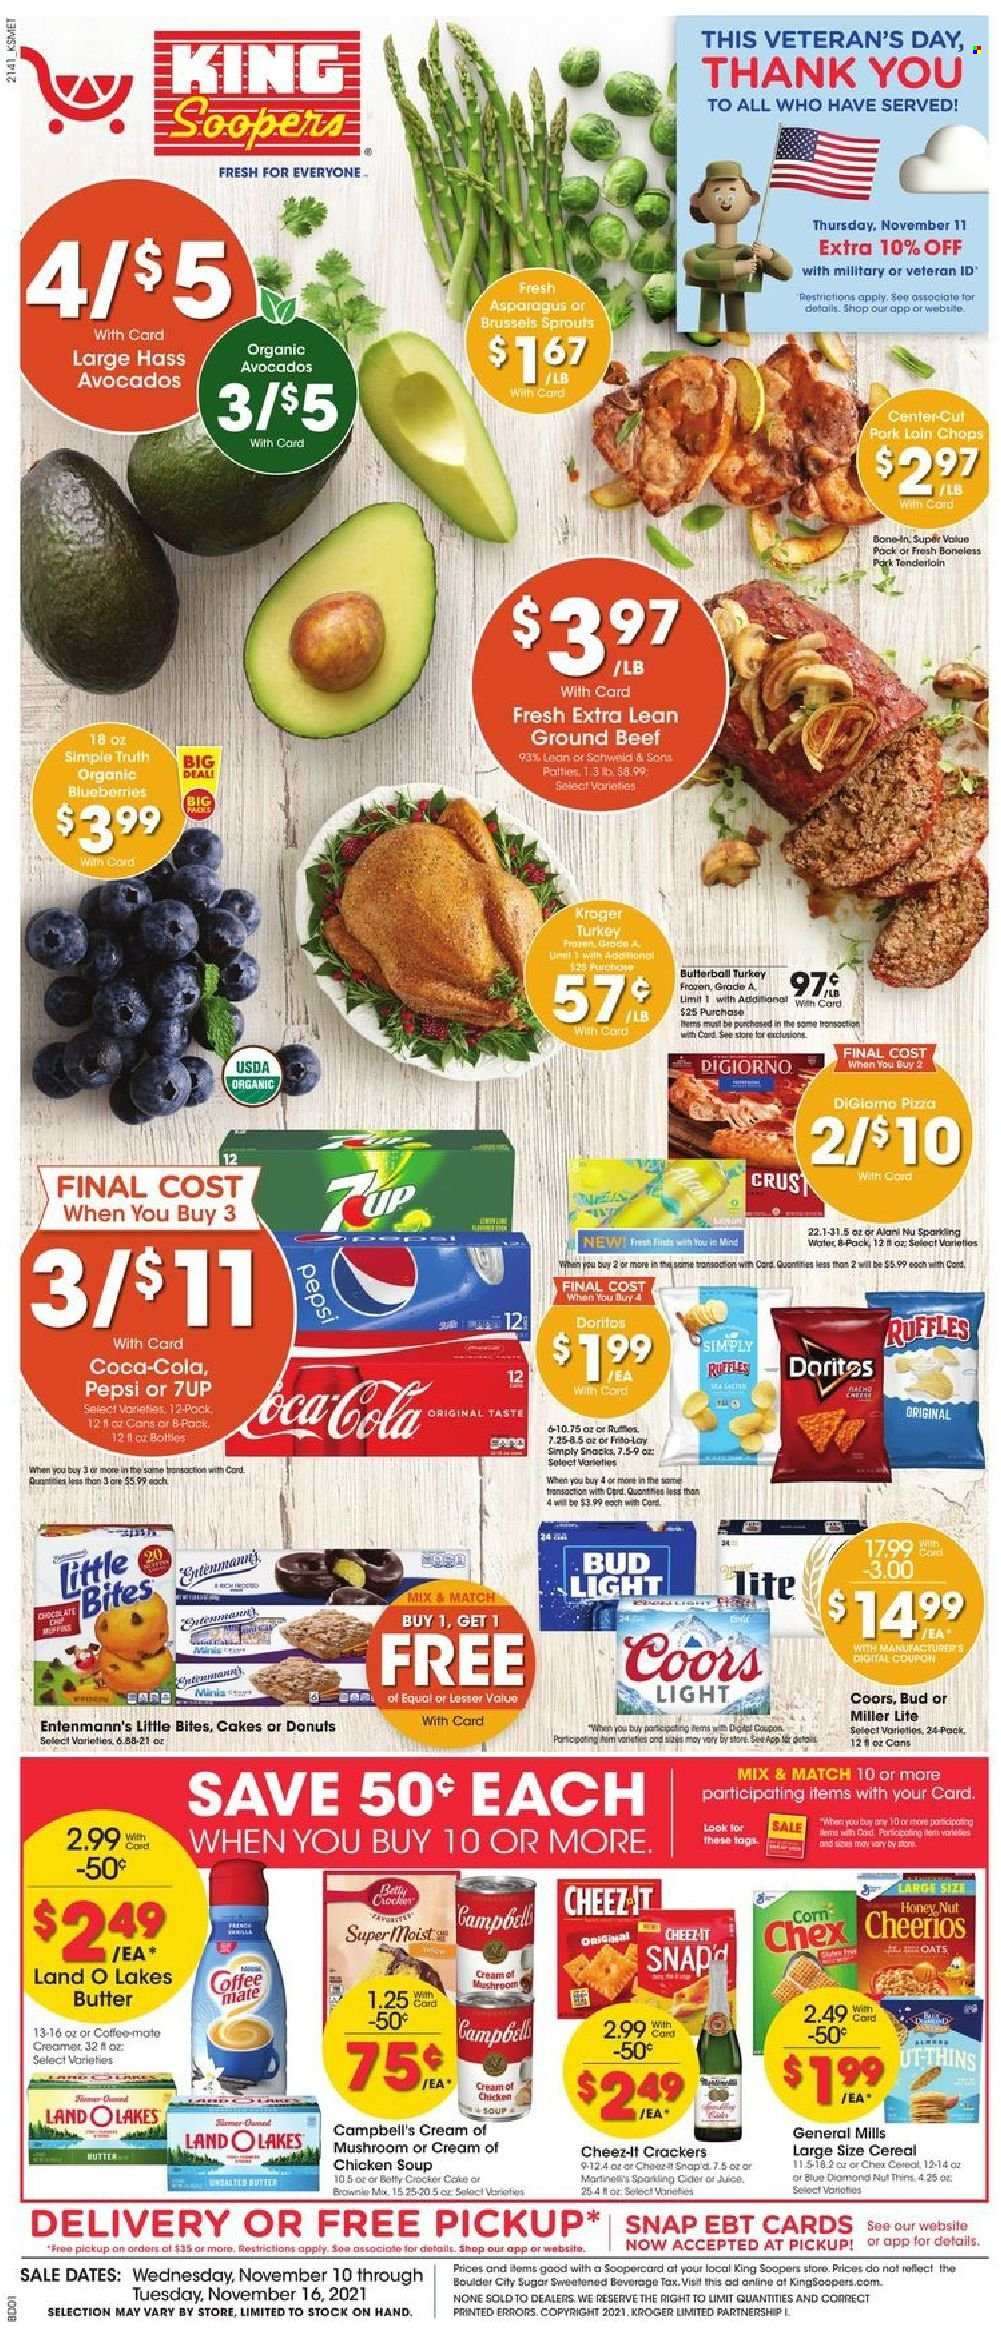 King Soopers Flyer - 11/10/2021 - 11/16/2021 - Sales products - cake, donut, Entenmann's, brownie mix, asparagus, corn, brussels sprout, avocado, blueberries, Campbell's, pizza, chicken soup, soup, Butterball, creamer, snack, crackers, Little Bites, Doritos, Thins, Cheez-It, Ruffles, sugar, oats, cereals, Cheerios, honey, Coca-Cola, Pepsi, juice, 7UP, sparkling water, coffee, sparkling cider, sparkling wine, cider, beer, Bud Light, beef meat, ground beef, pork chops, pork loin, pork meat, pork tenderloin, Miller Lite, Coors. Page 1.